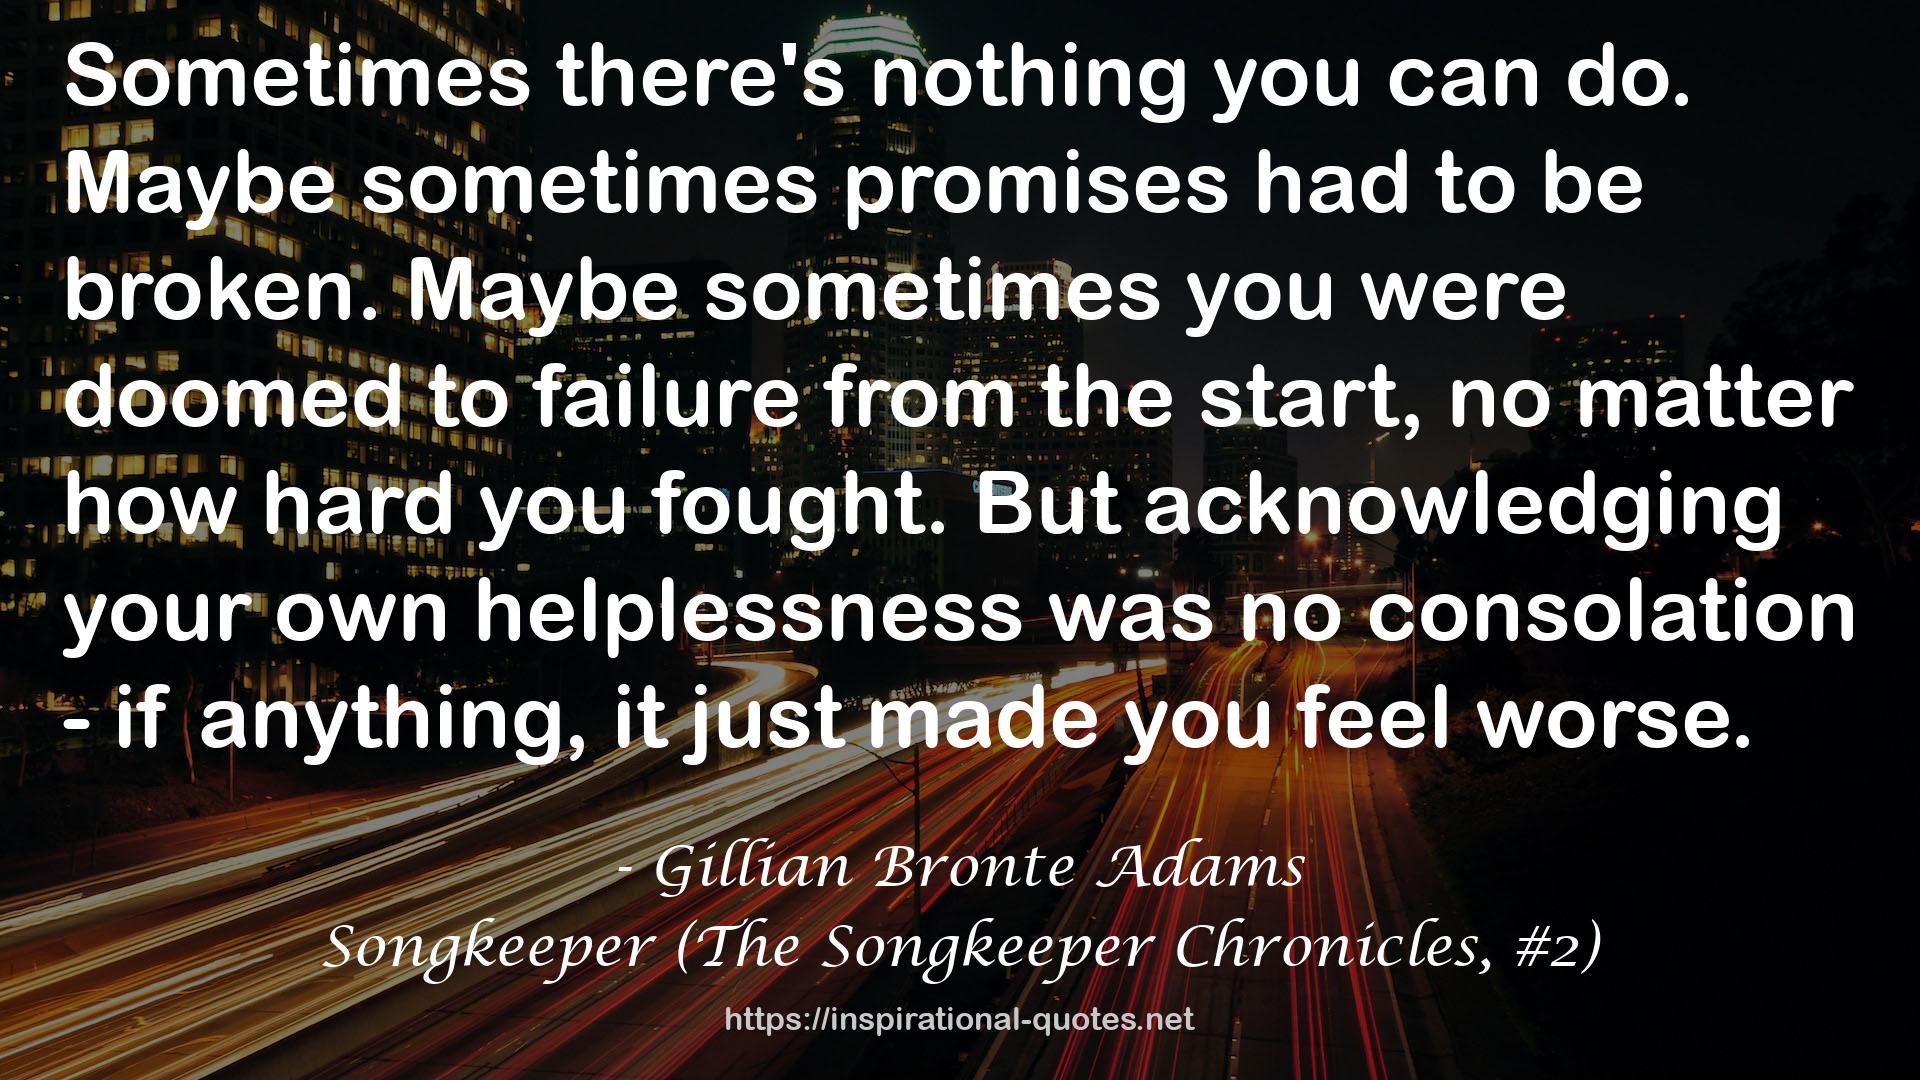 Songkeeper (The Songkeeper Chronicles, #2) QUOTES